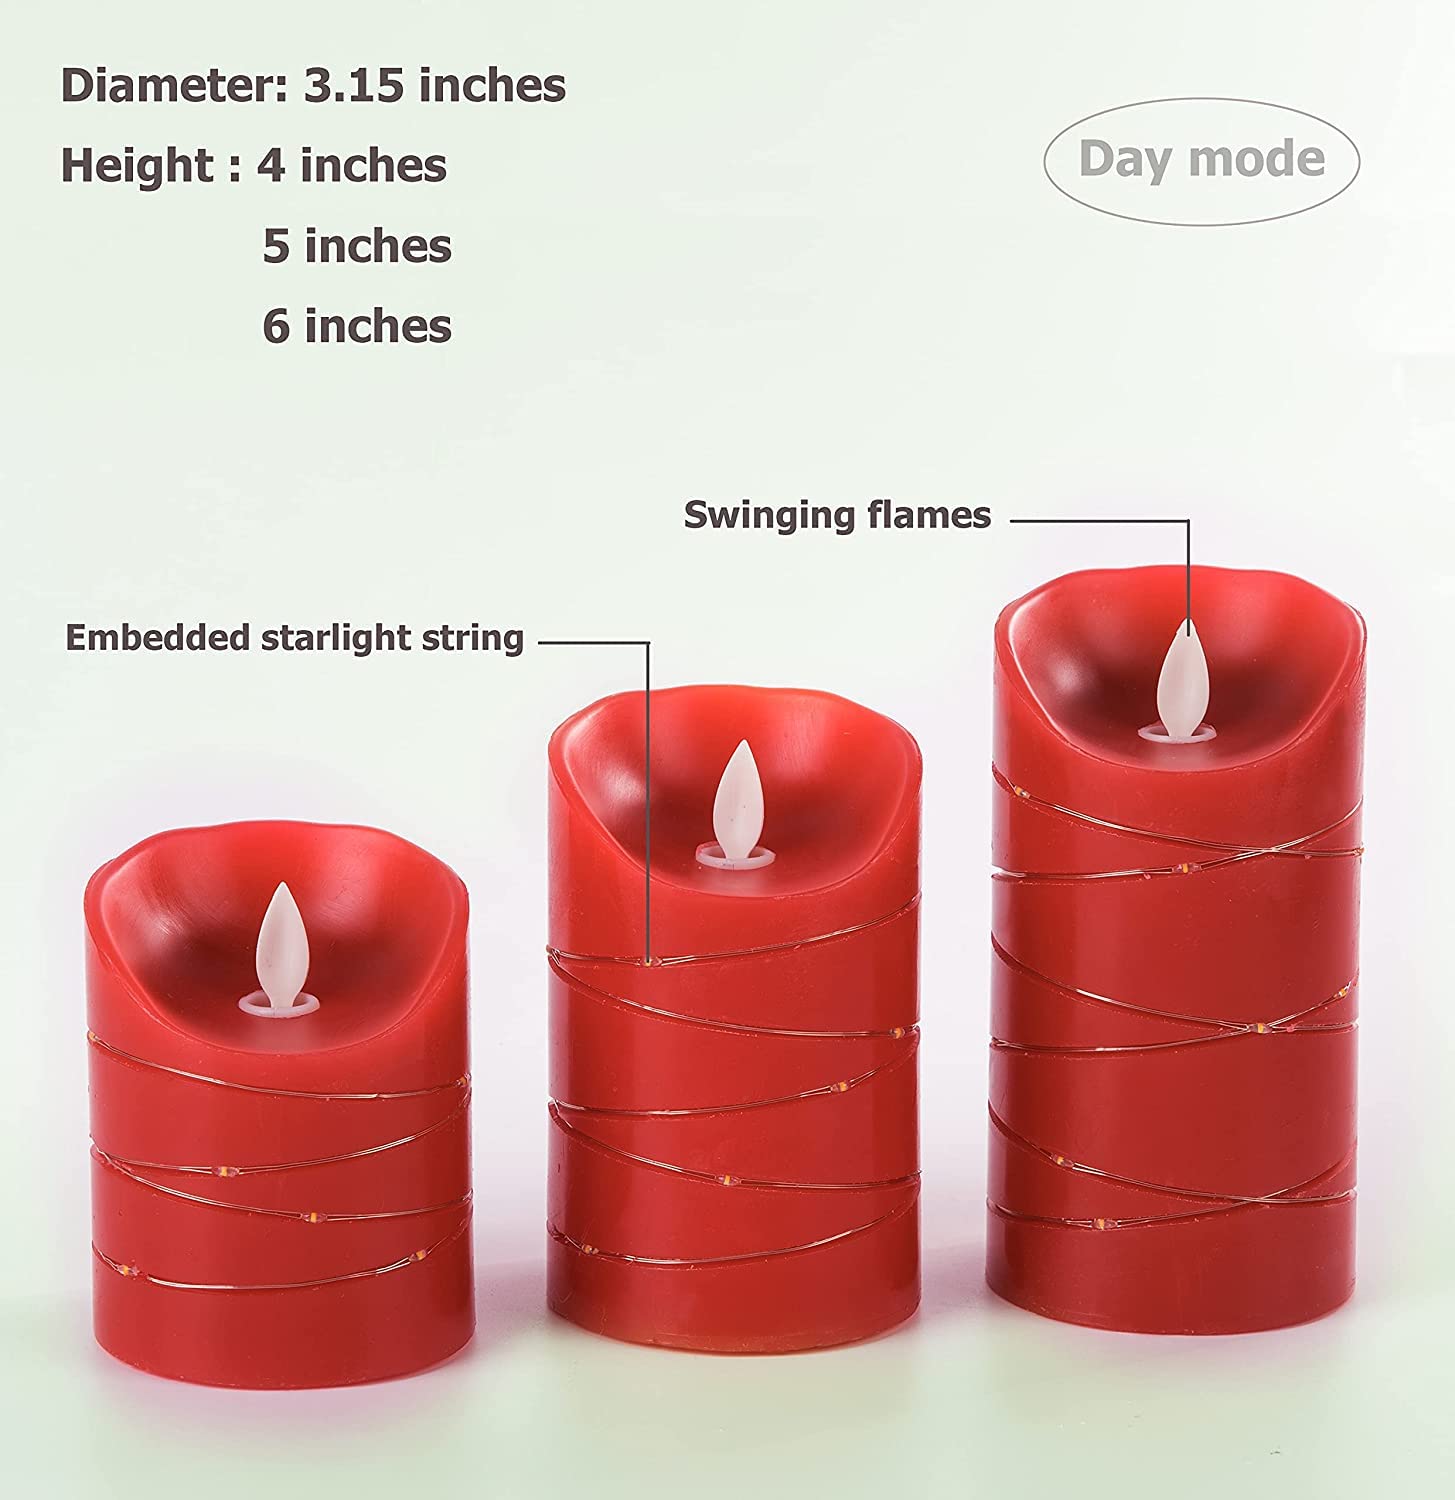 DANIP red LED flameless Candle with Embedded Star String, 3-Piece Set of LED Candles, with 11 Button Remote Control, 24-Hour Timer Function, Dancing Flames, Real Wax, Battery Powered. (Red)